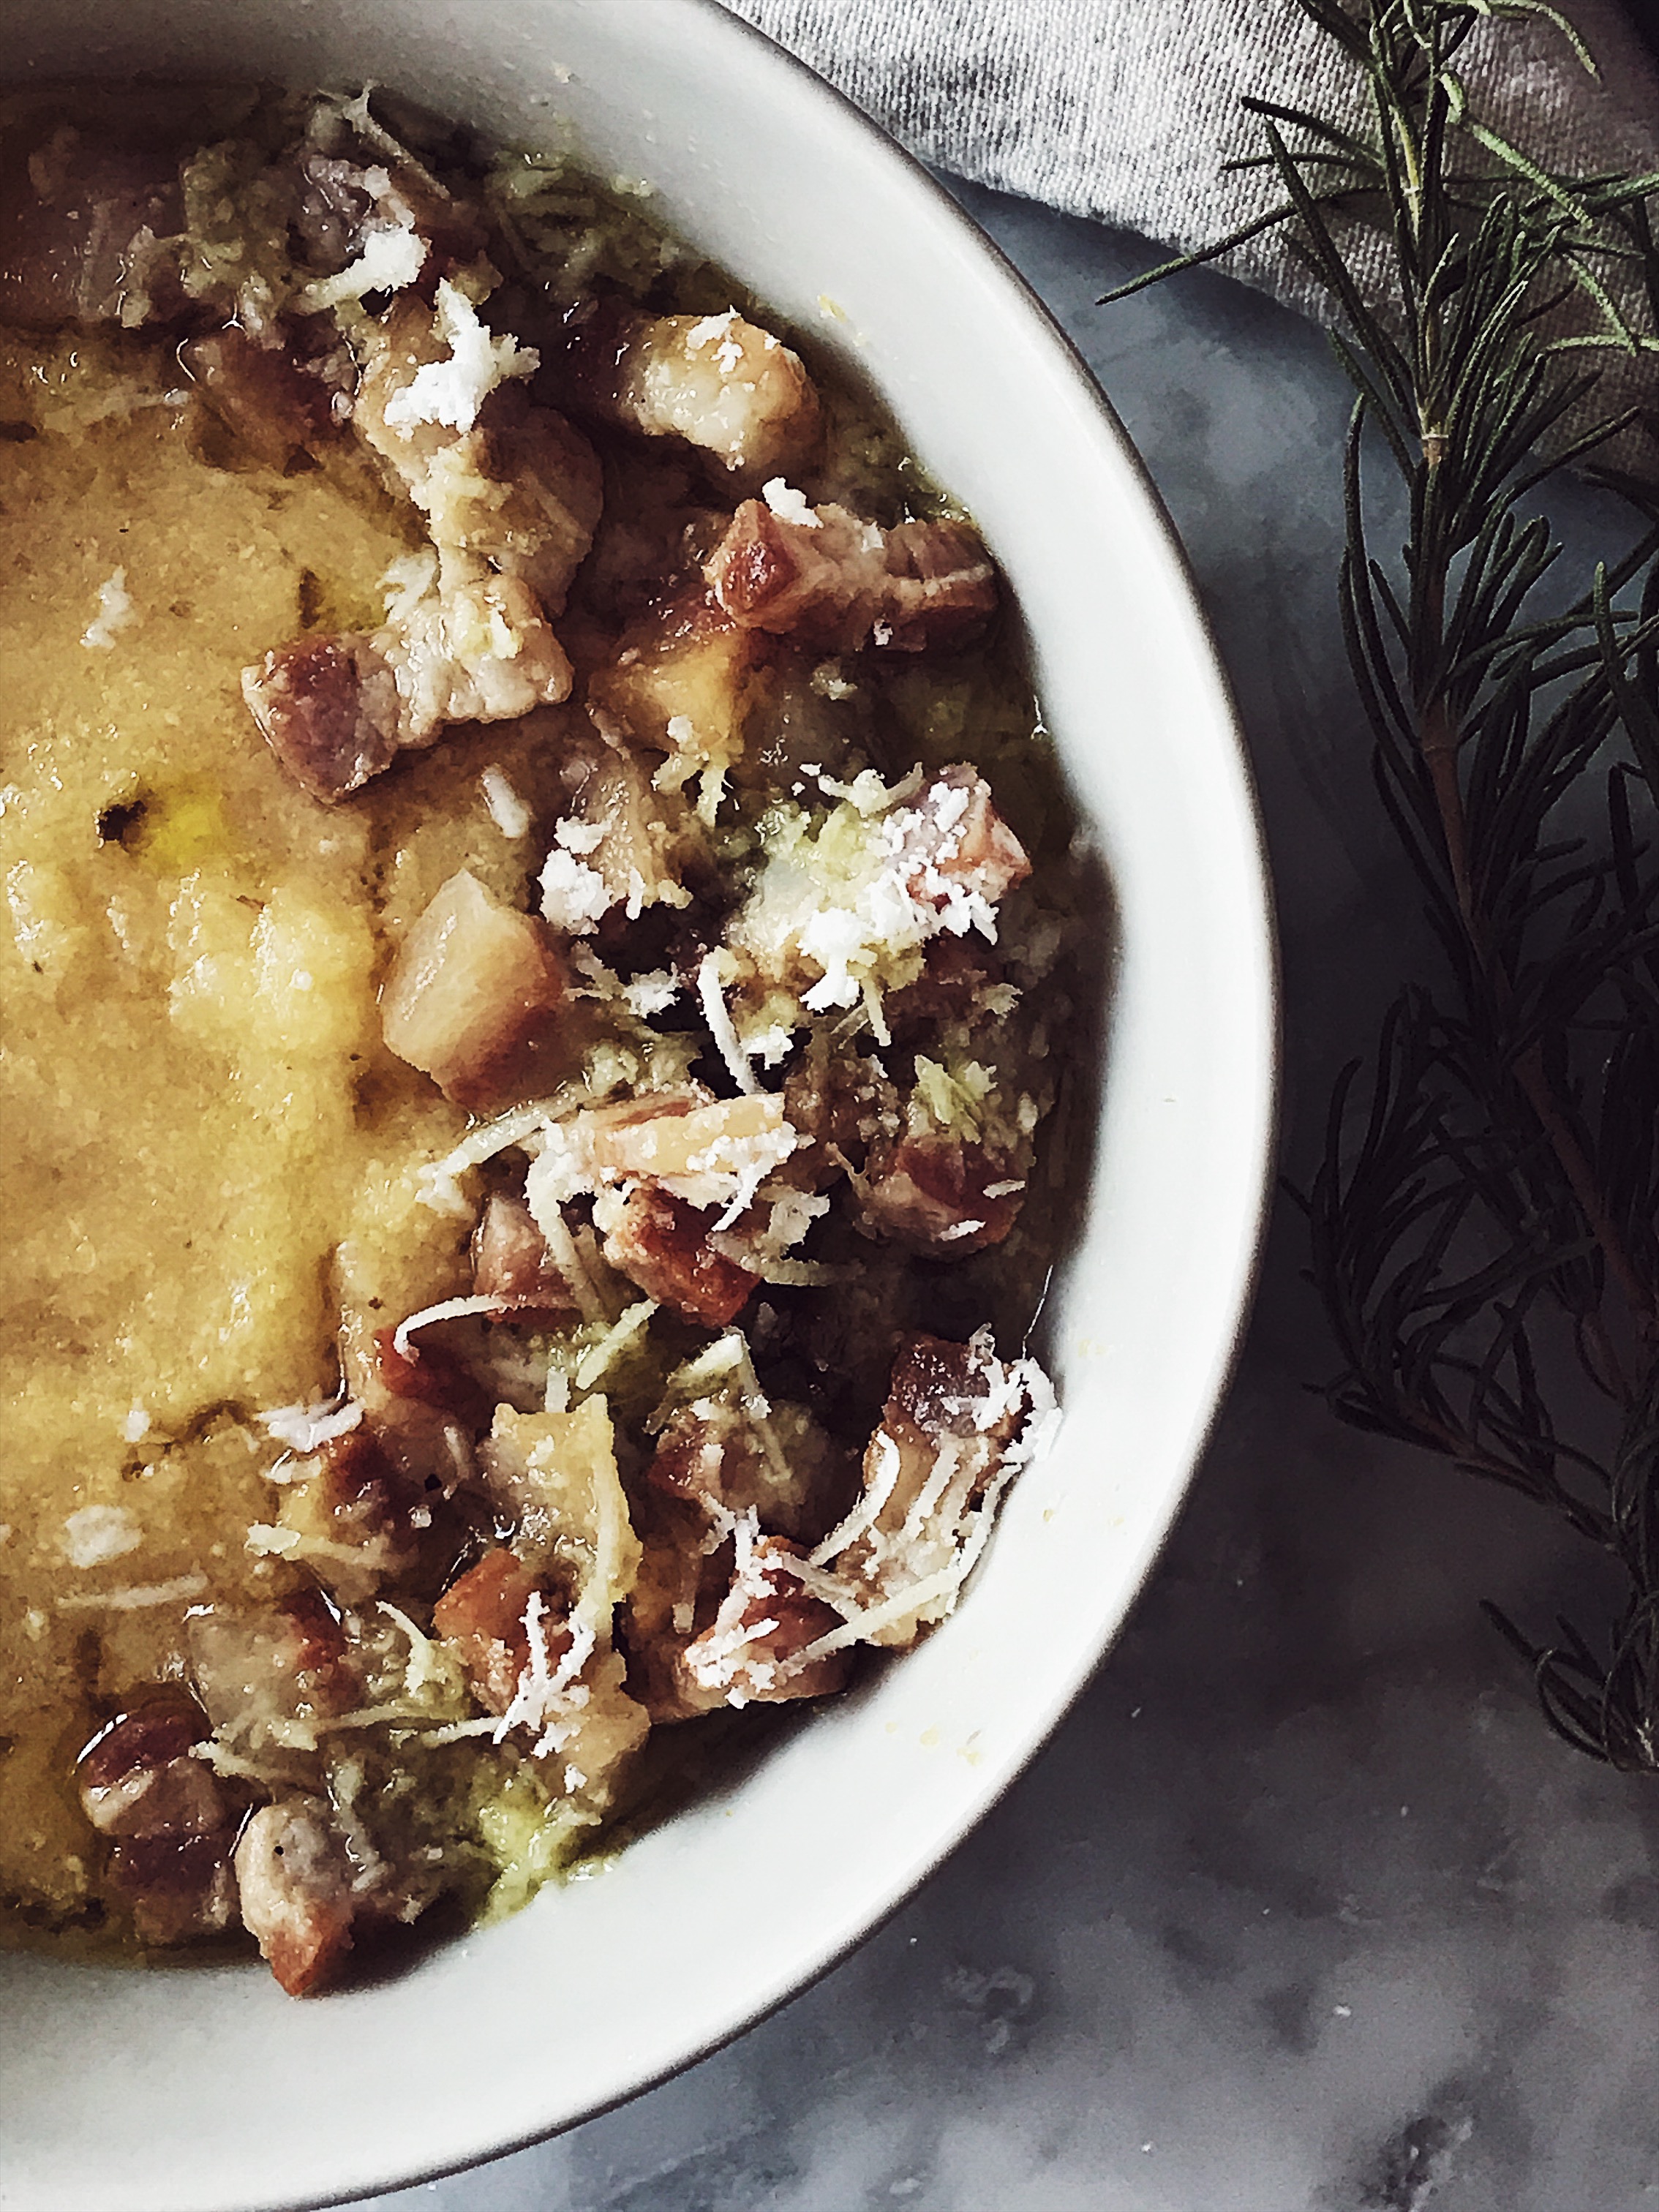 creamy polenta from cornmeal in a white bowl, seasoned with guanciale and grated pecorino cheese